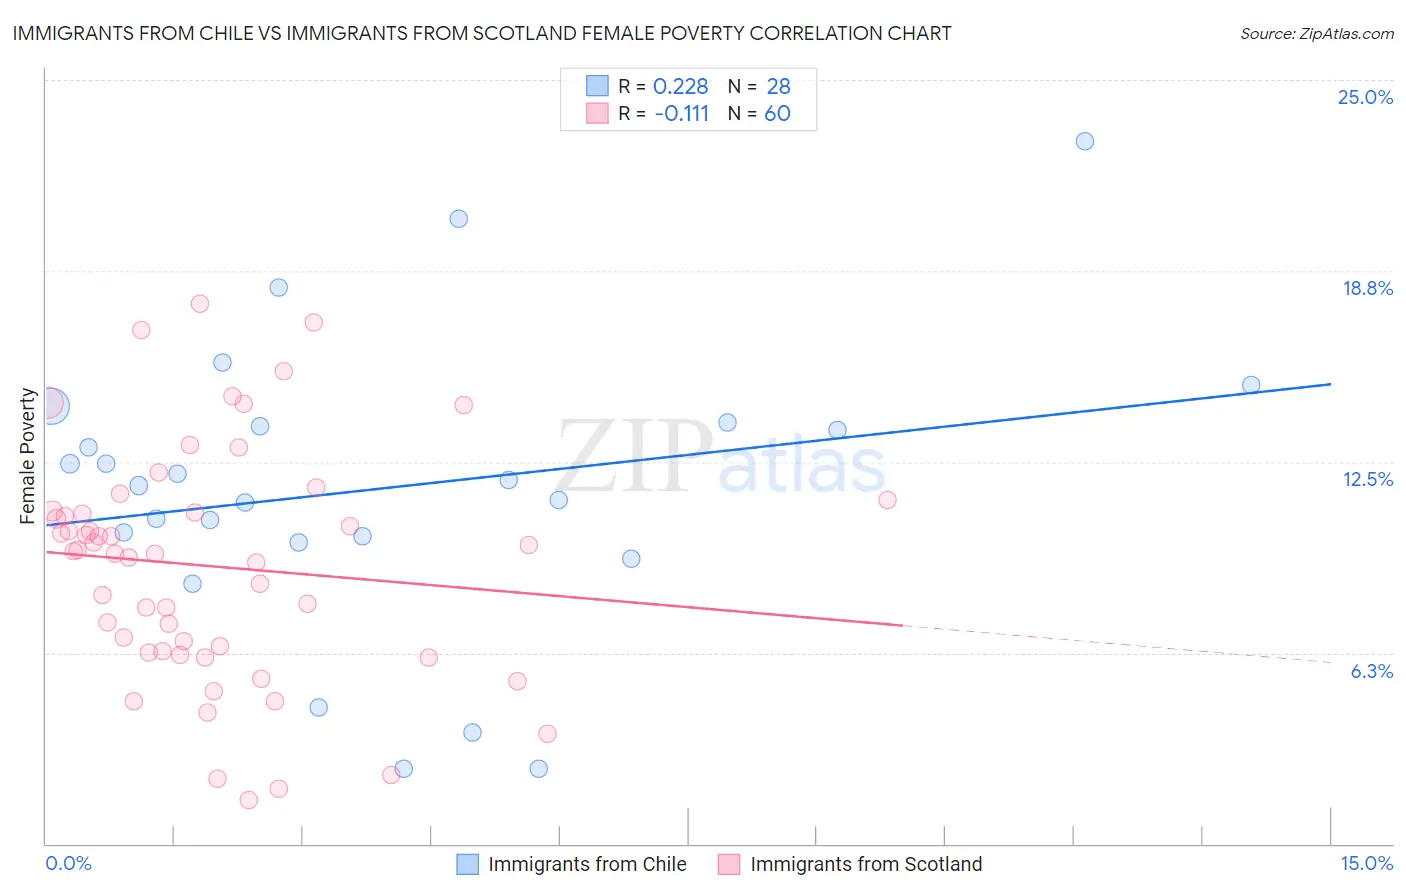 Immigrants from Chile vs Immigrants from Scotland Female Poverty